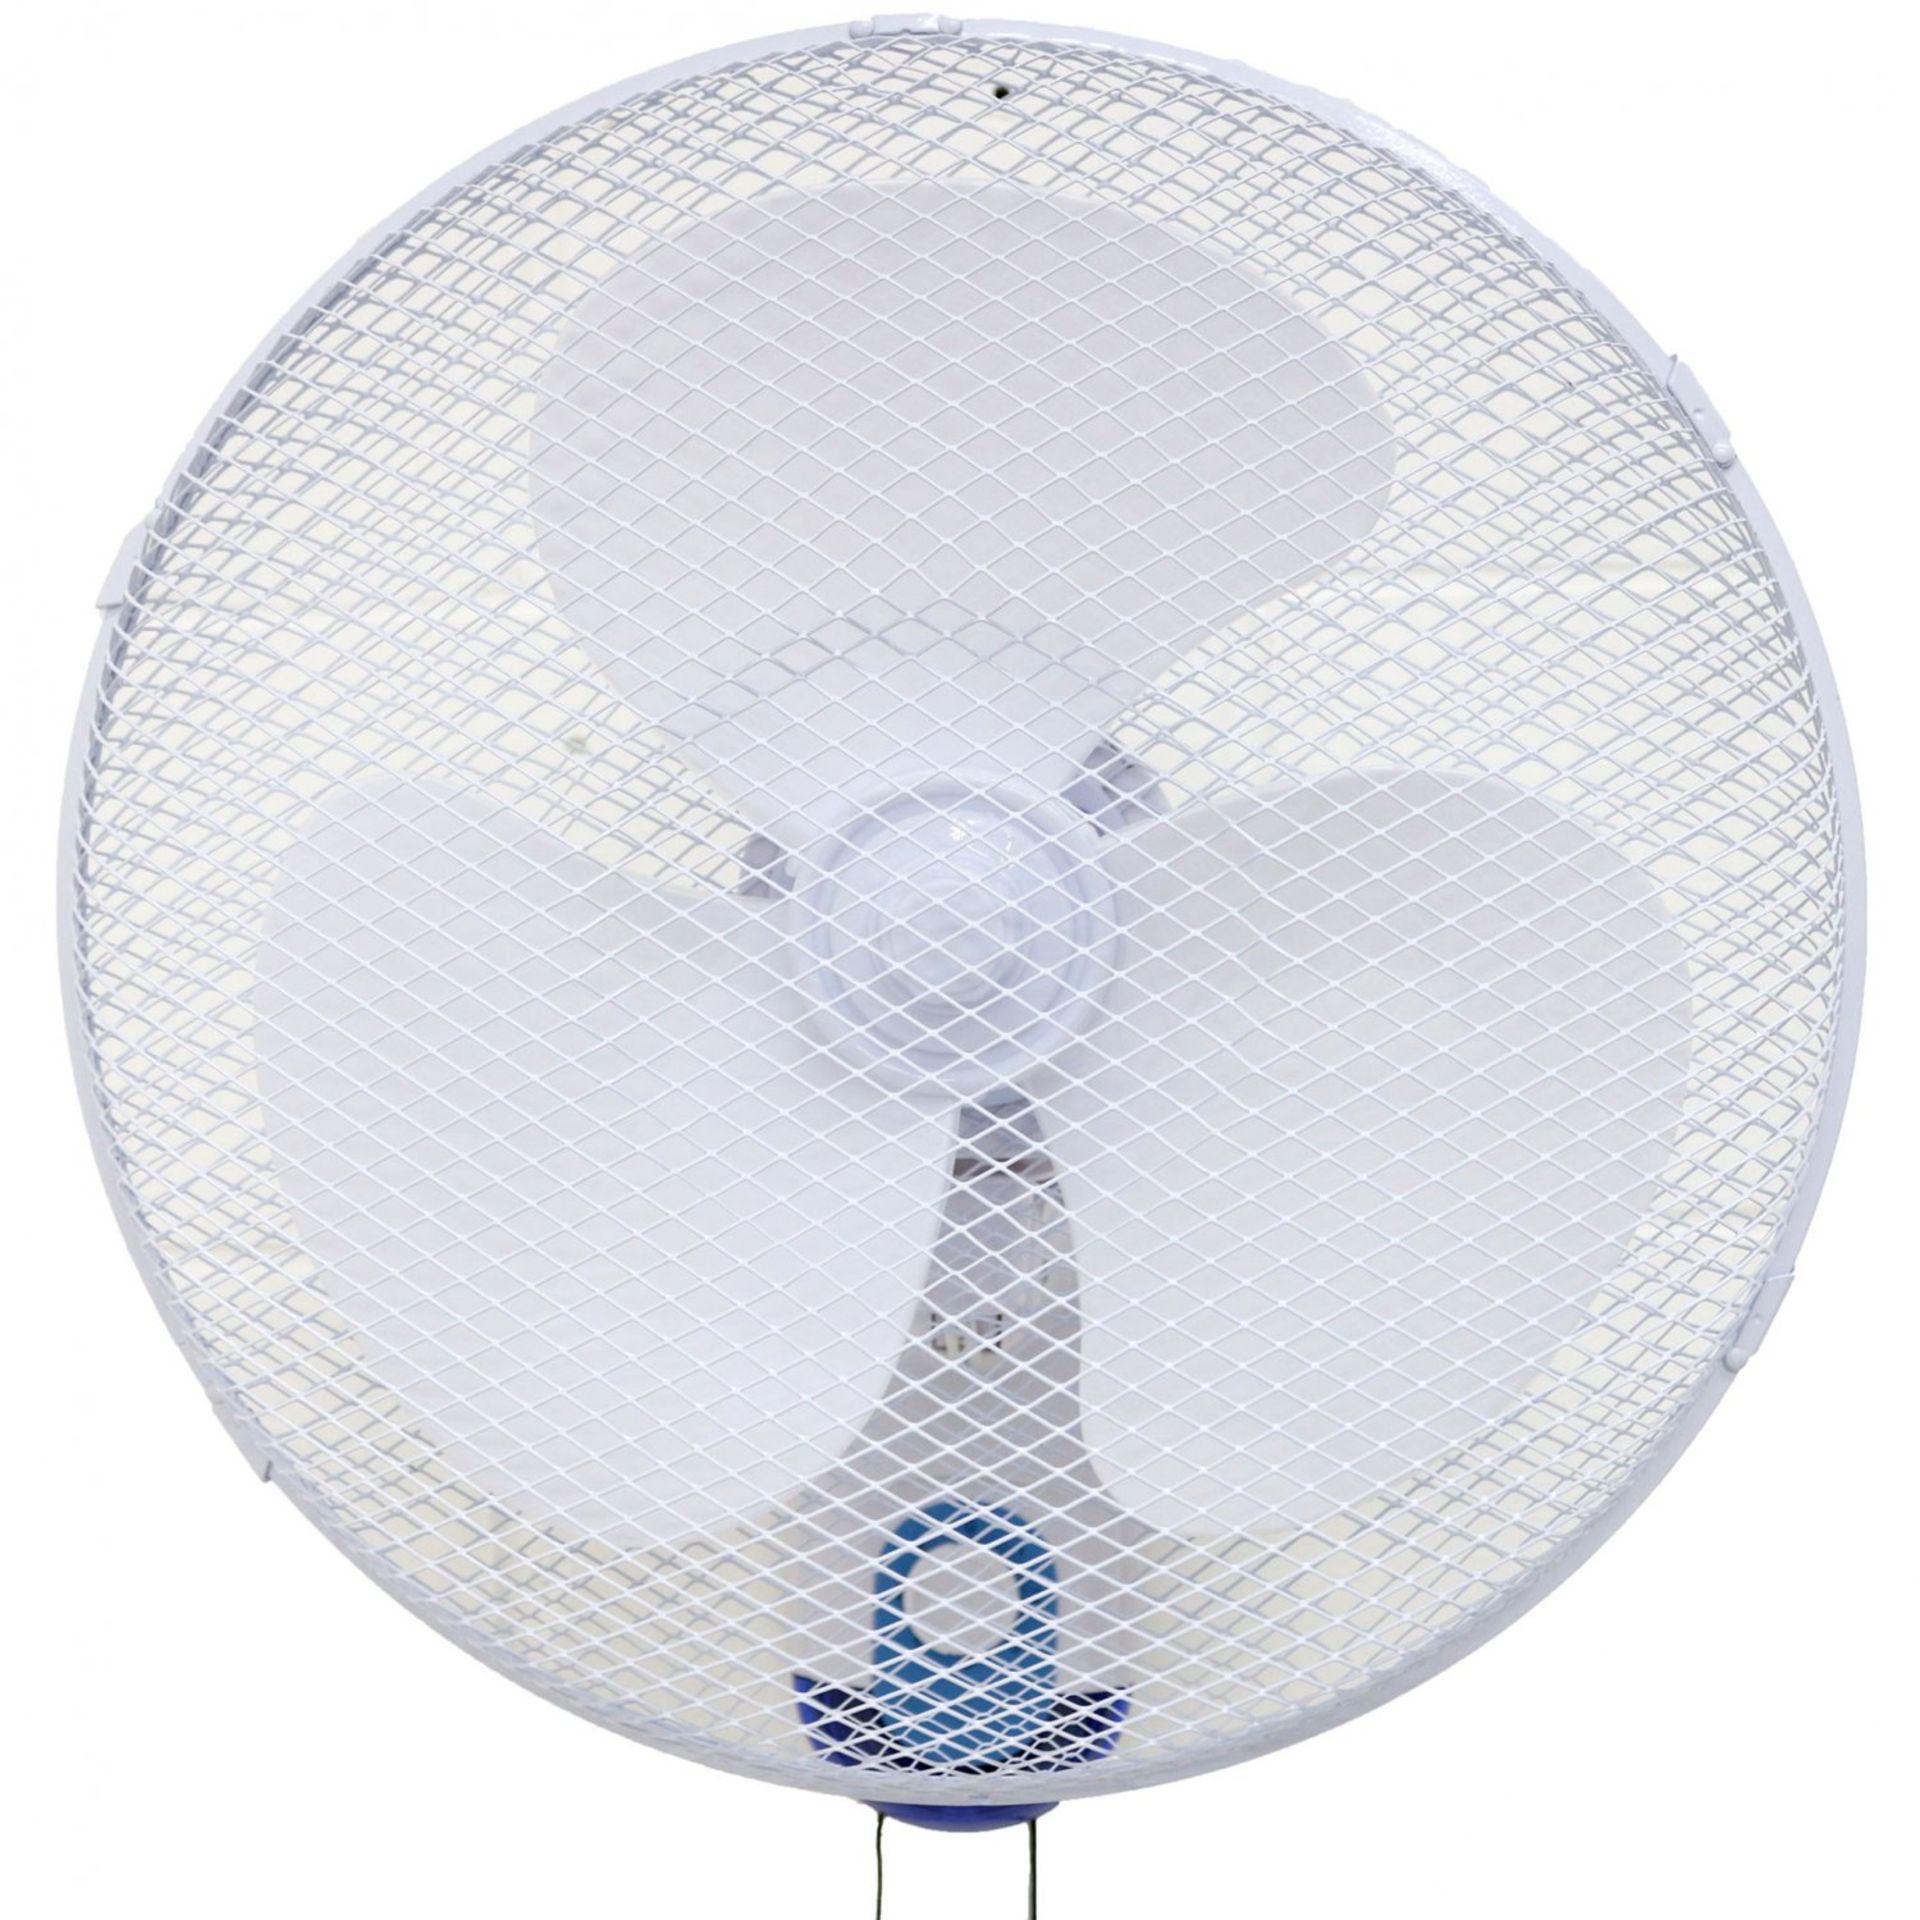 (SK129) 16" Wall Mounted Fan Stay cool this year with the 16" Wall Mounted Fan - fitted with... - Image 2 of 2